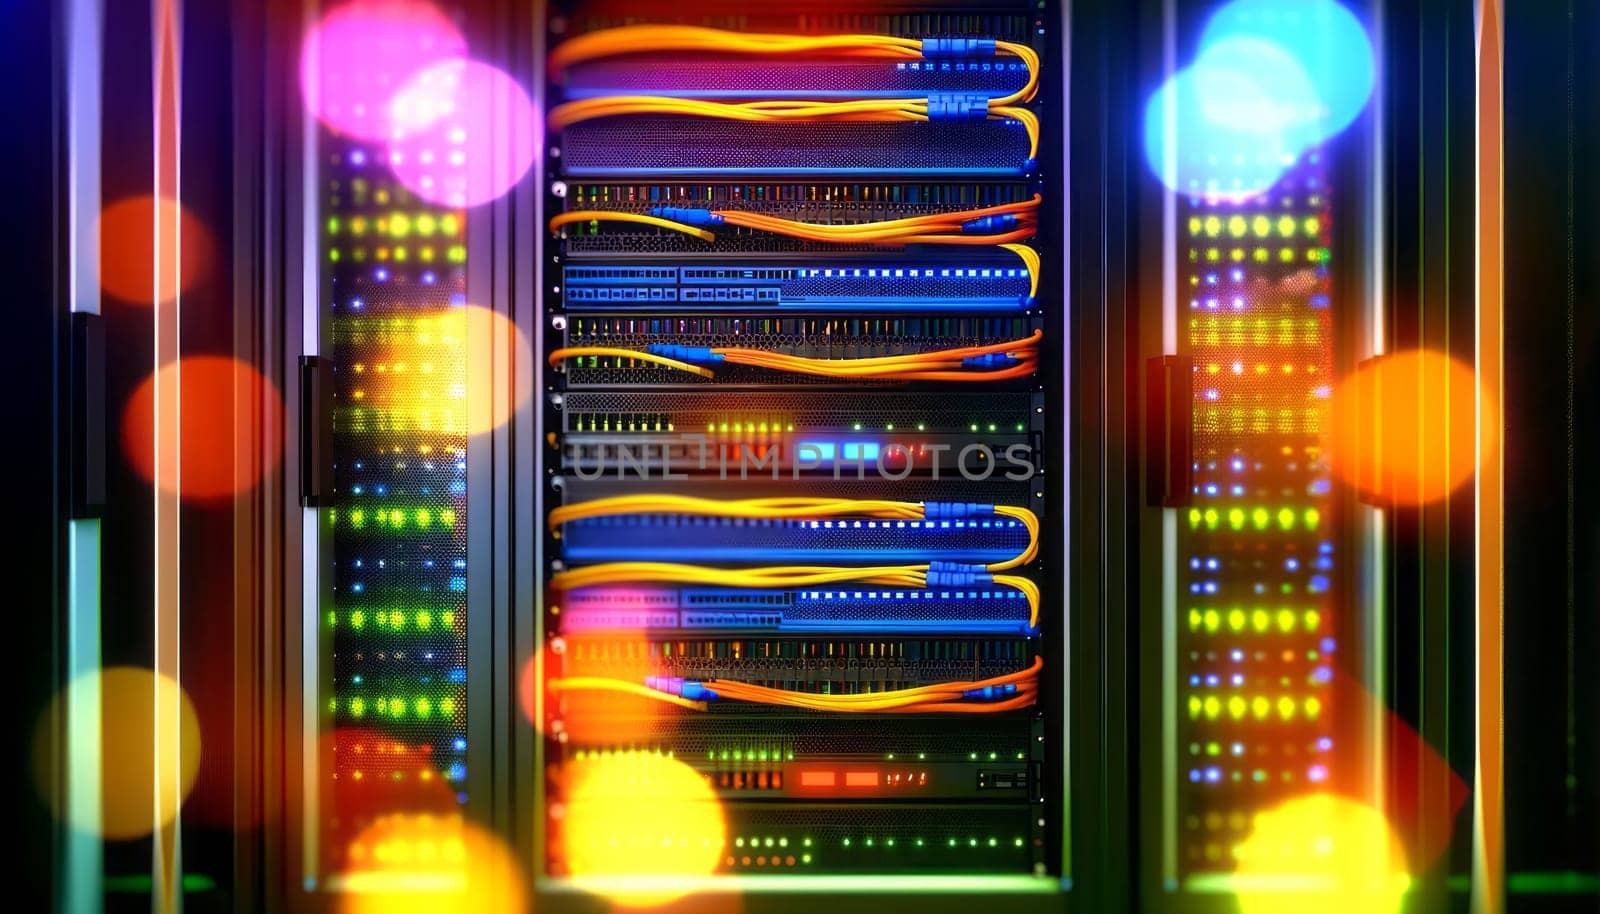 A wide digital illustration of a server room in a data center with a vibrant and colorful display of lights. The racks are filled with various equipment including servers, switches, and cables. The cables are neatly organized and illuminated with neon-like LED lights in colors such as orange, yellow, and blue, creating a high-tech and futuristic atmosphere. The lighting creates a vivid contrast against the dark background of the equipment, highlighting the complexity and modernity of the technology. There's a soft glow and bokeh effect on the lights, suggesting activity and connectivity within the network infrastructure.